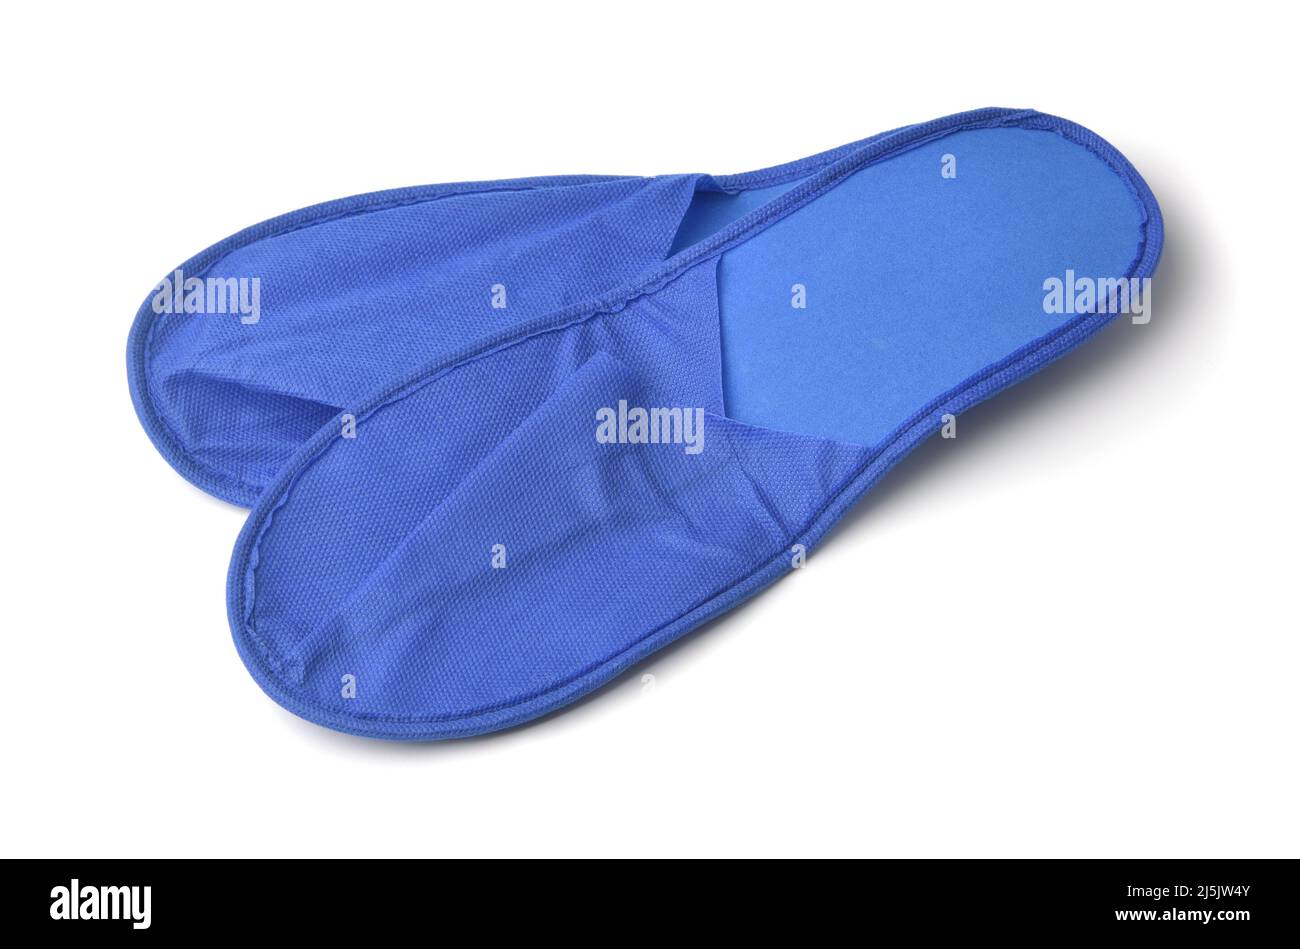 Pair of blue disposable slippers isolated on white Stock Photo